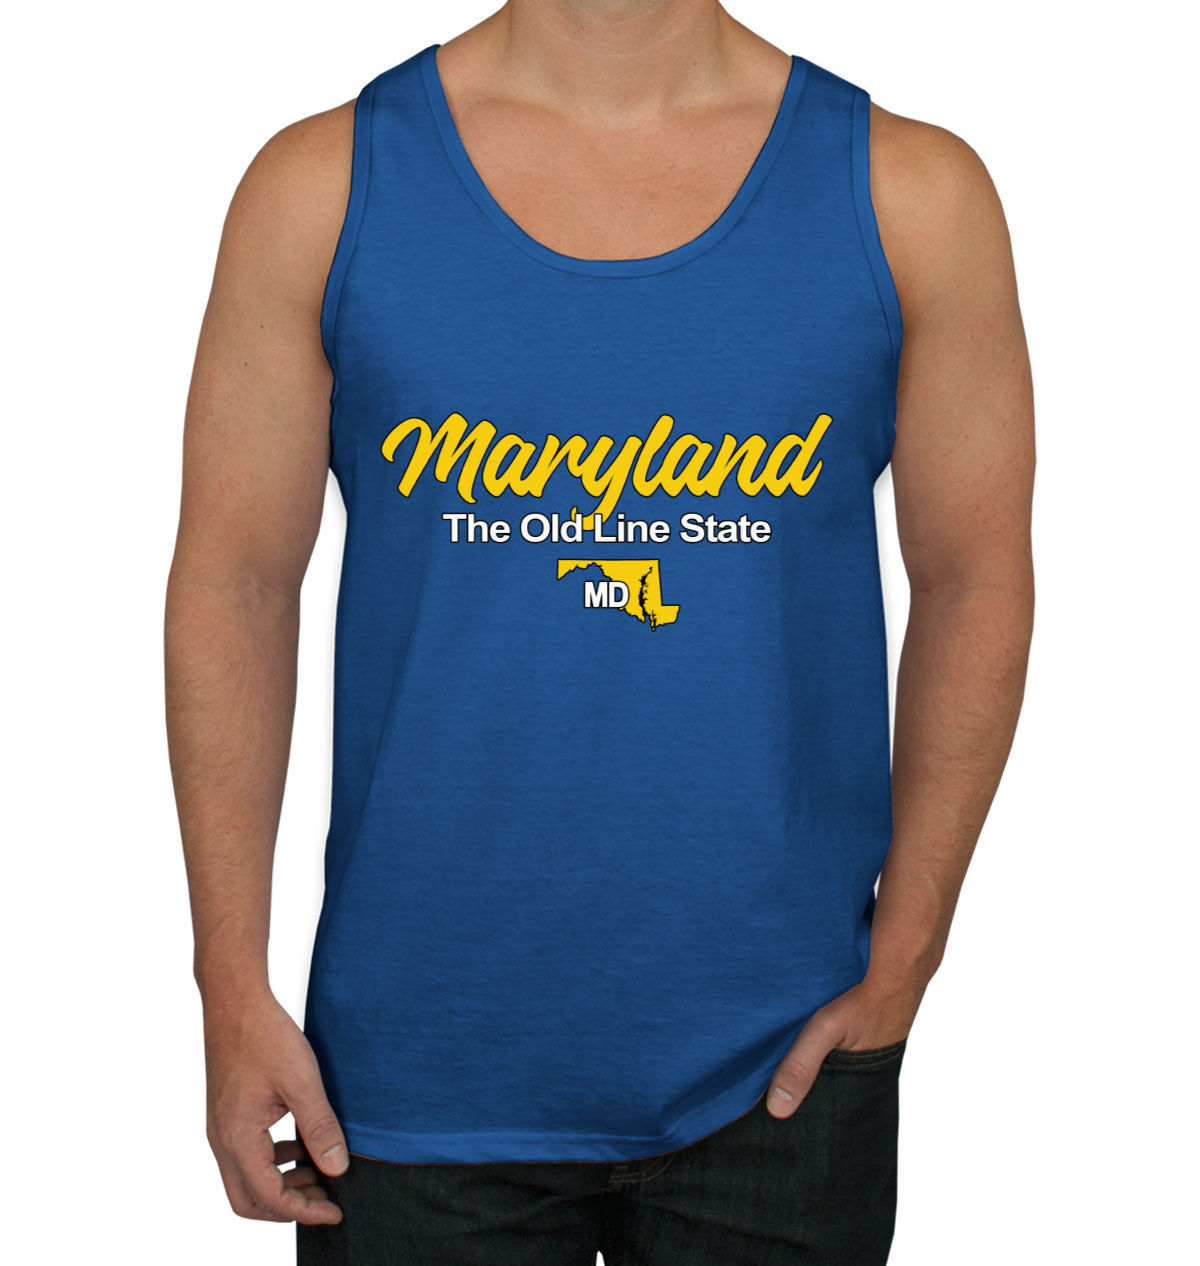 Maryland The Old Line State Men's Tank Top